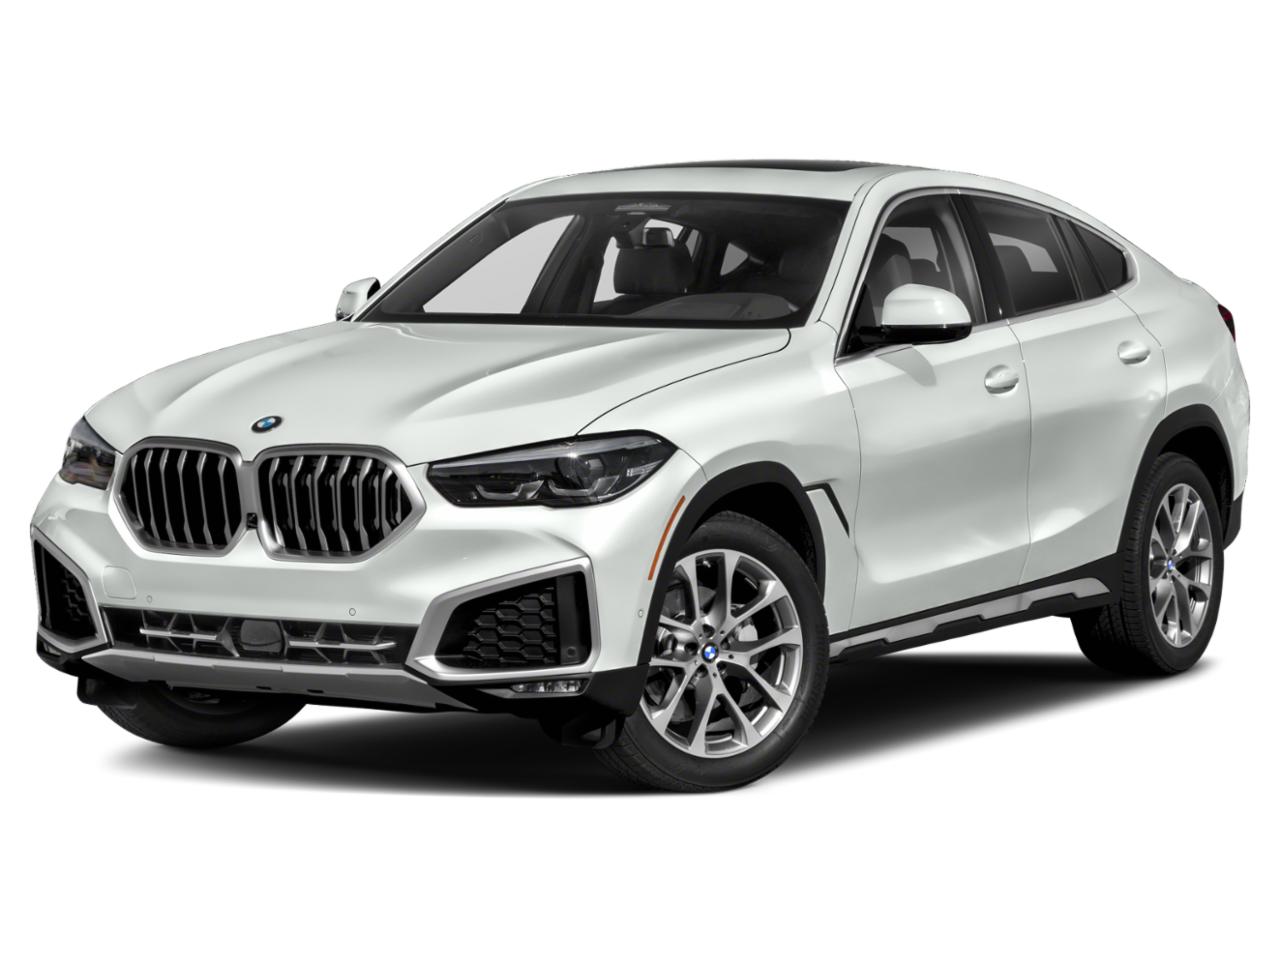 2021 BMW X6 M50i Vehicle Photo in Fort Lauderdale, FL 33316